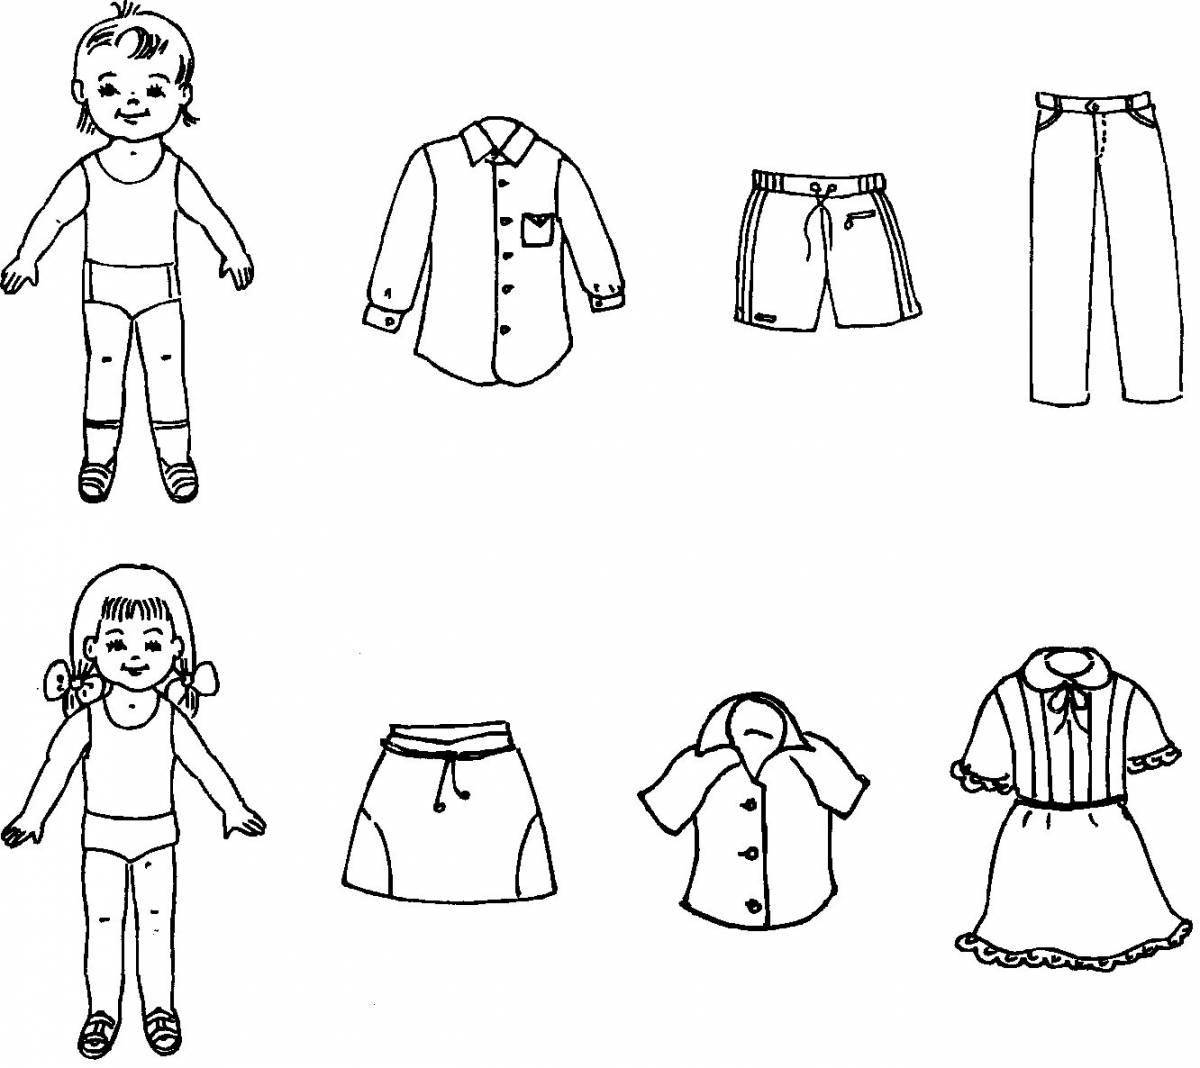 Coloring page adorable summer clothes for kids